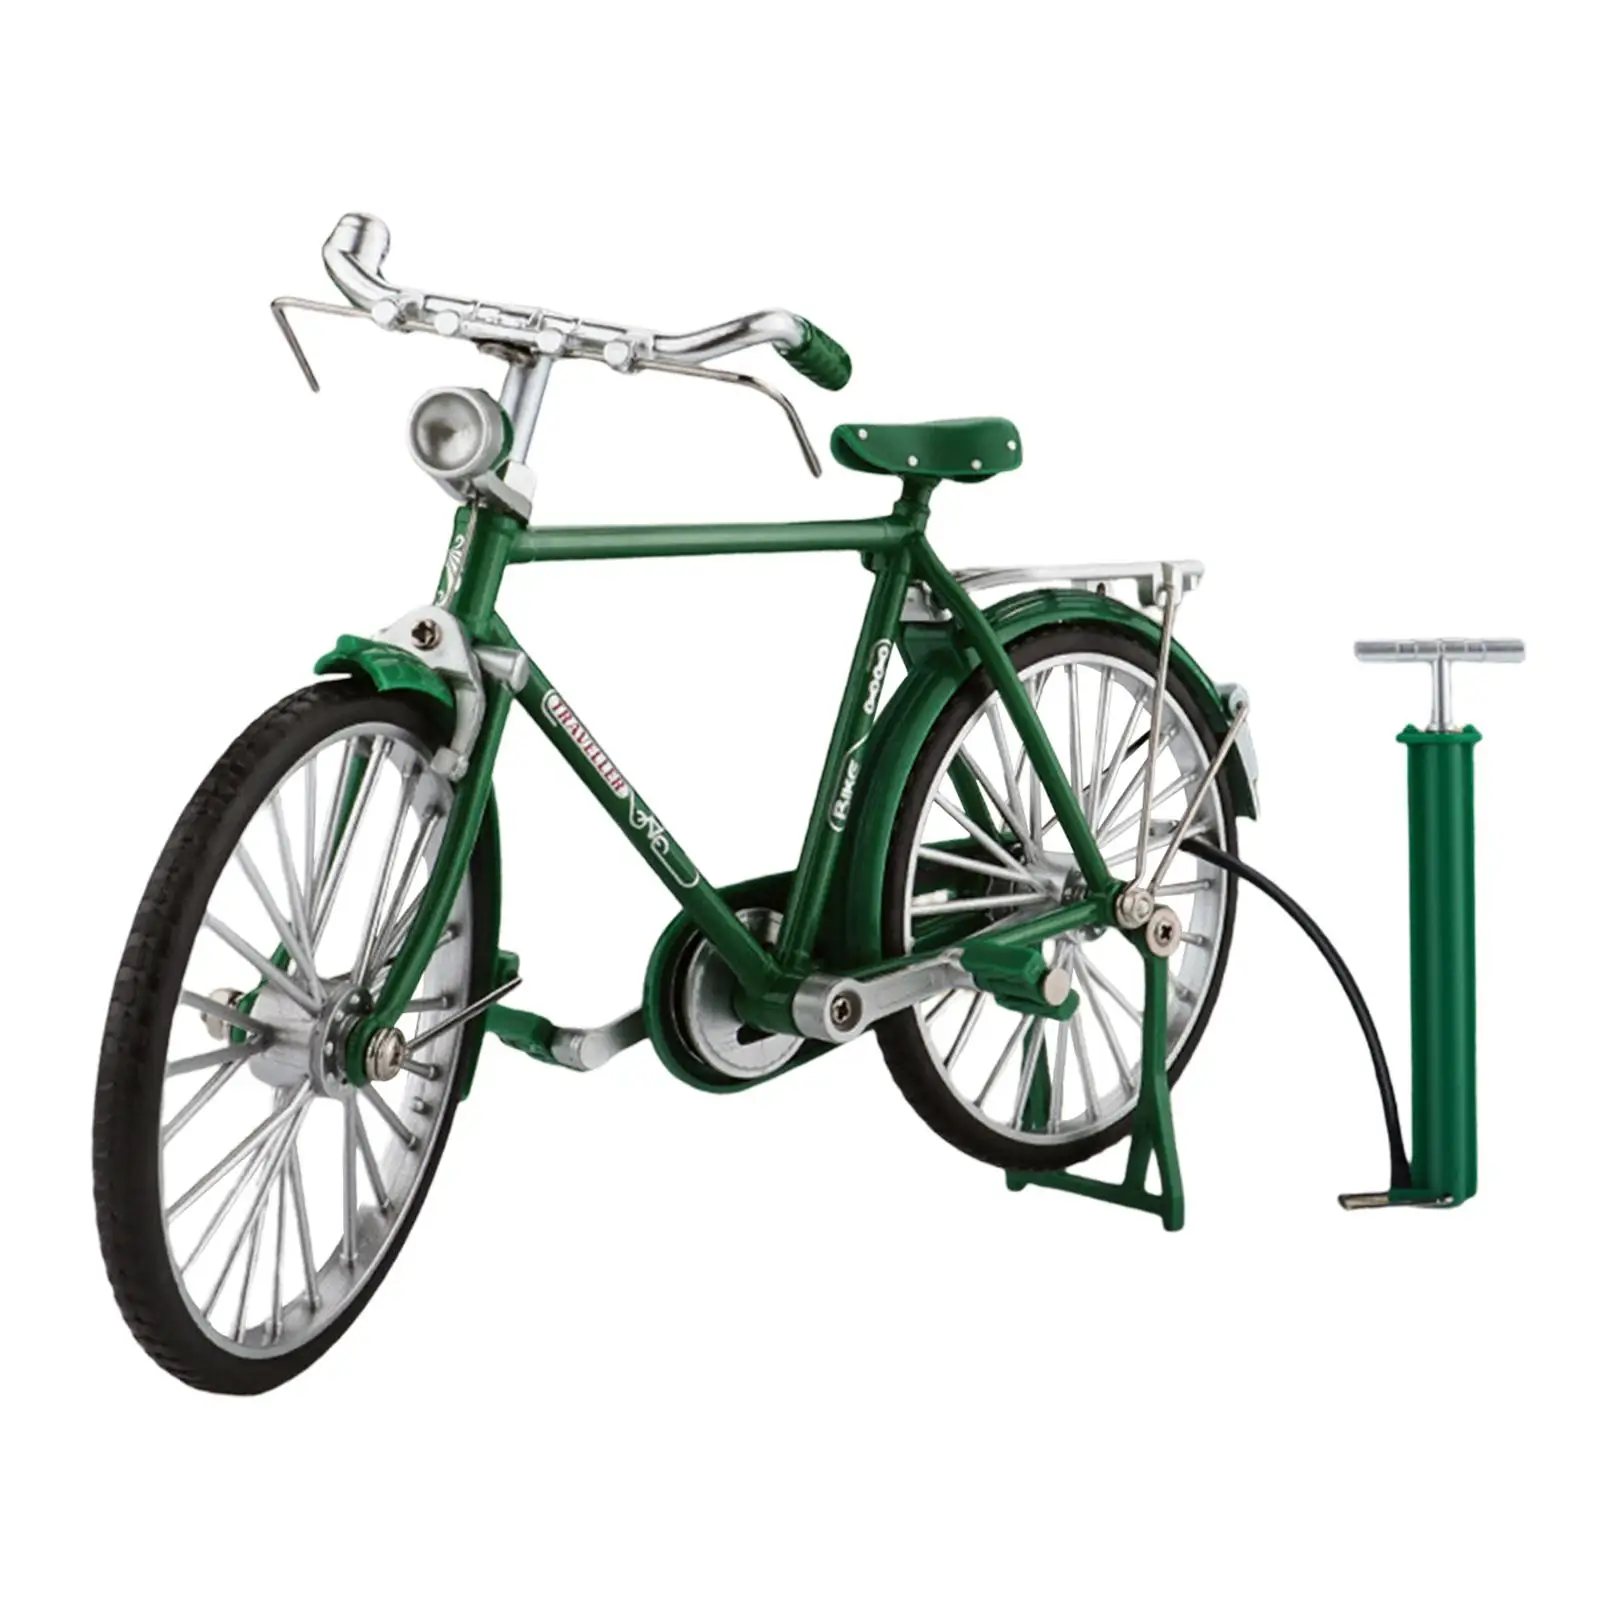 1:10 Simulation Bike Model Collections Handicraft Alloy Classical Bike Toy Metal Finger Bike for Office Indoor Ornaments Girls